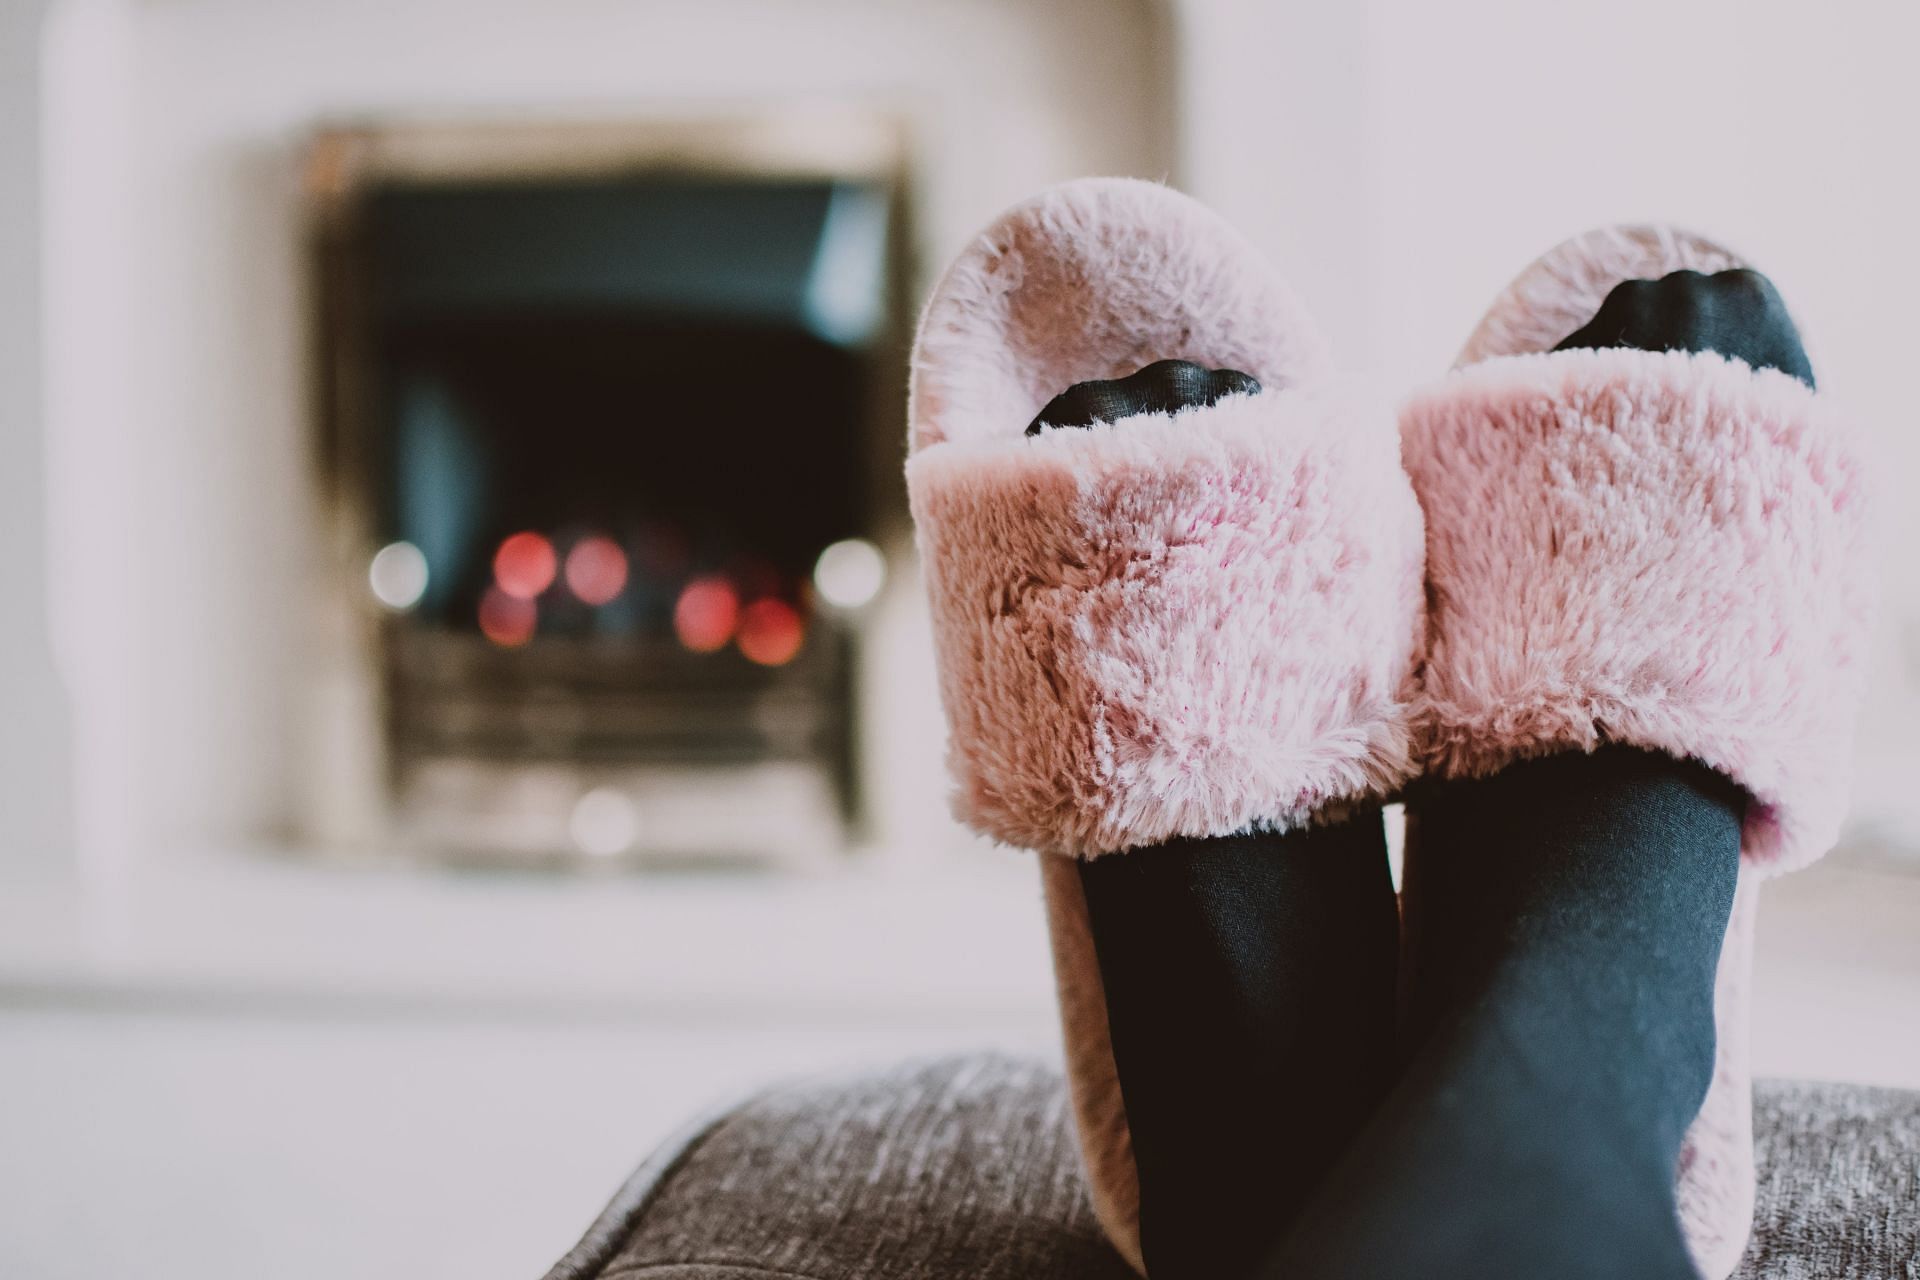 Stress also causes cold in feet. (Image via Pexles/ Lisa Fotios)